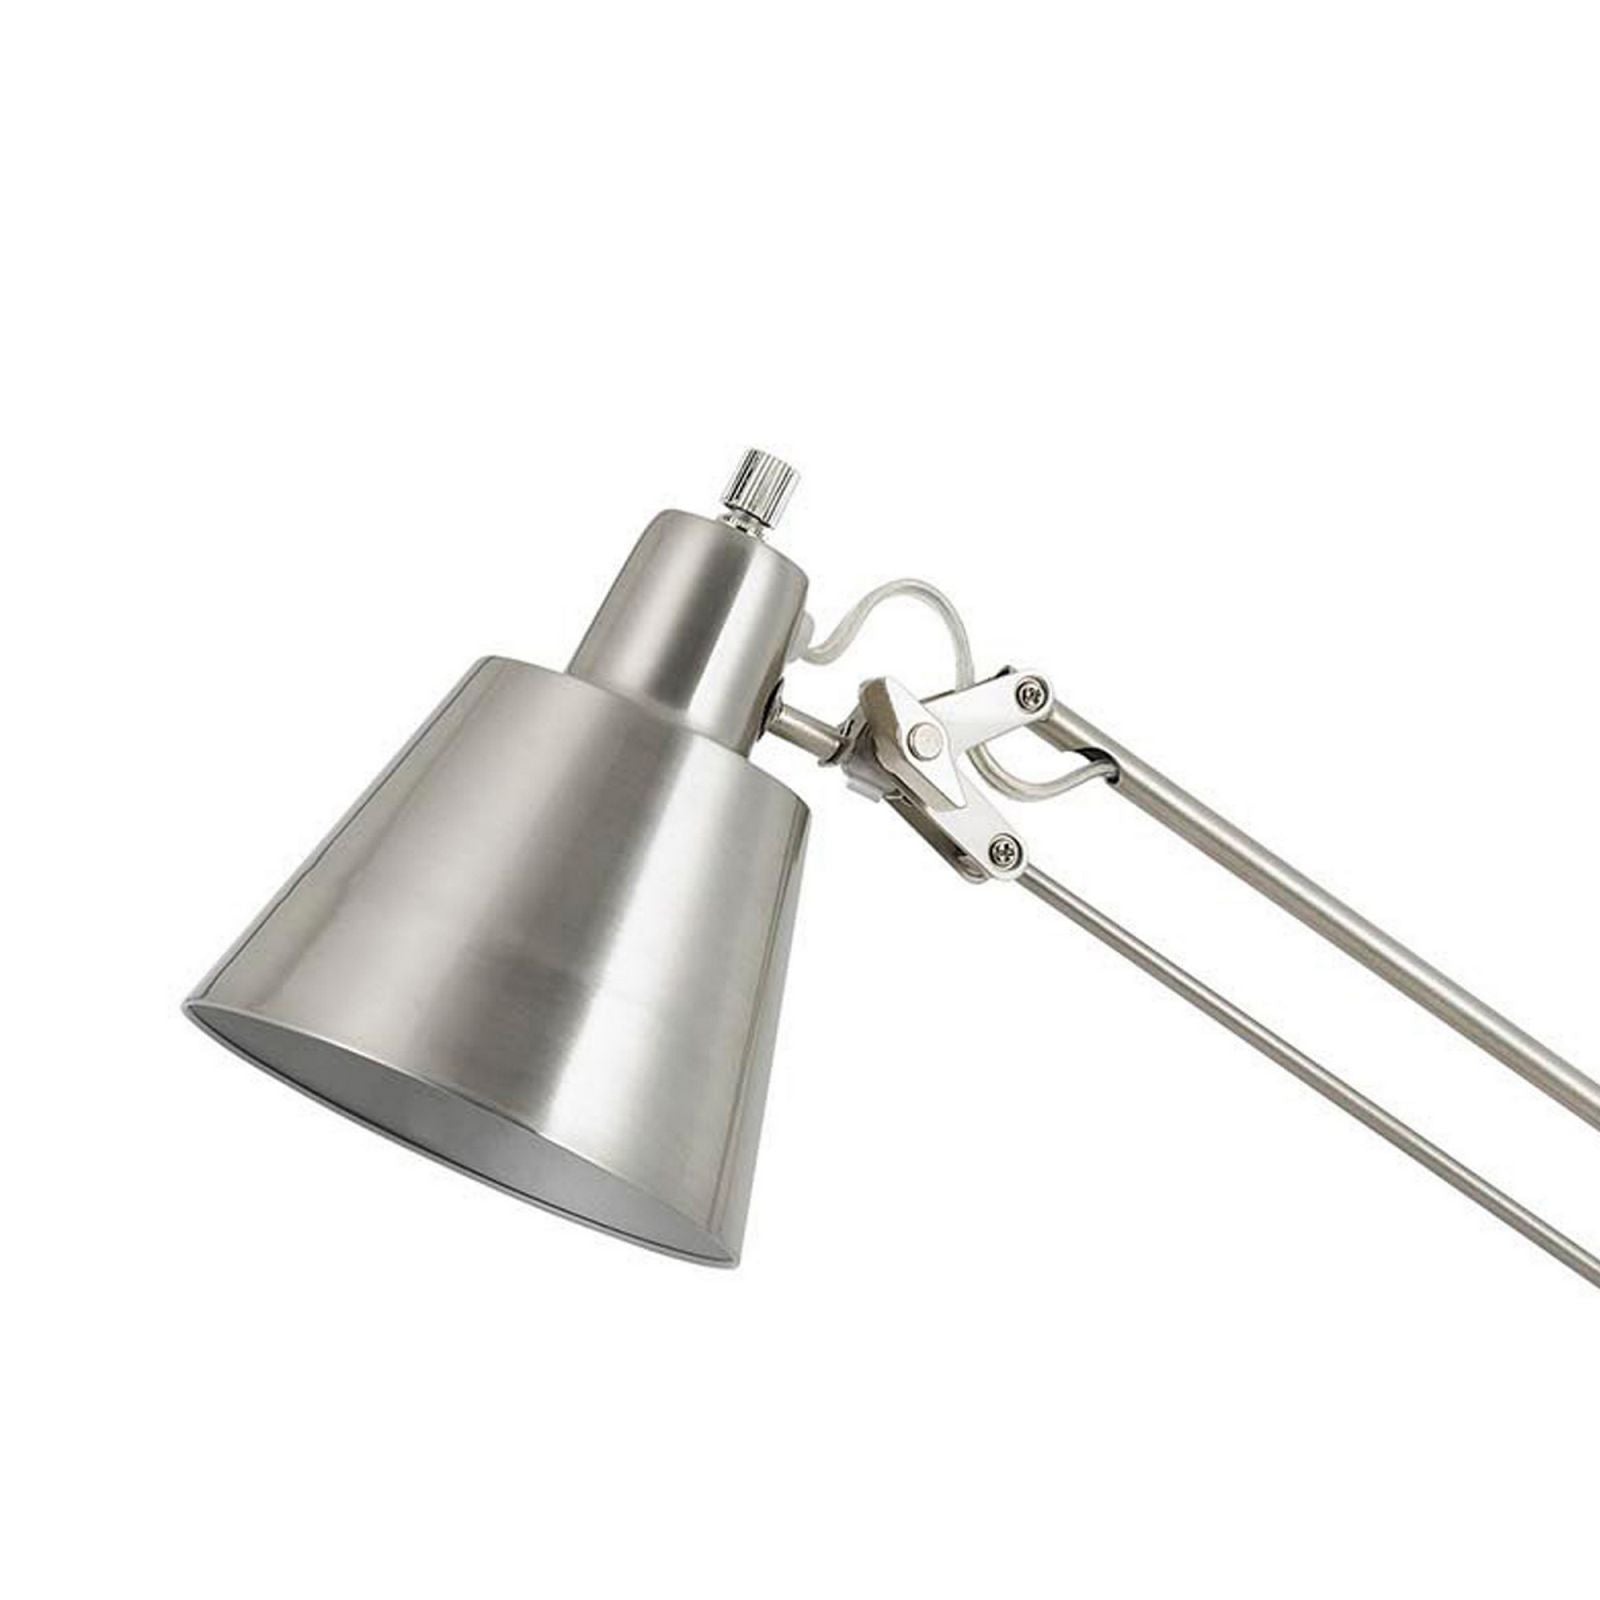 60W Metal Task Lamp With Adjustable Arms And Swivel Head, Set Of 2, Silver By Benzara